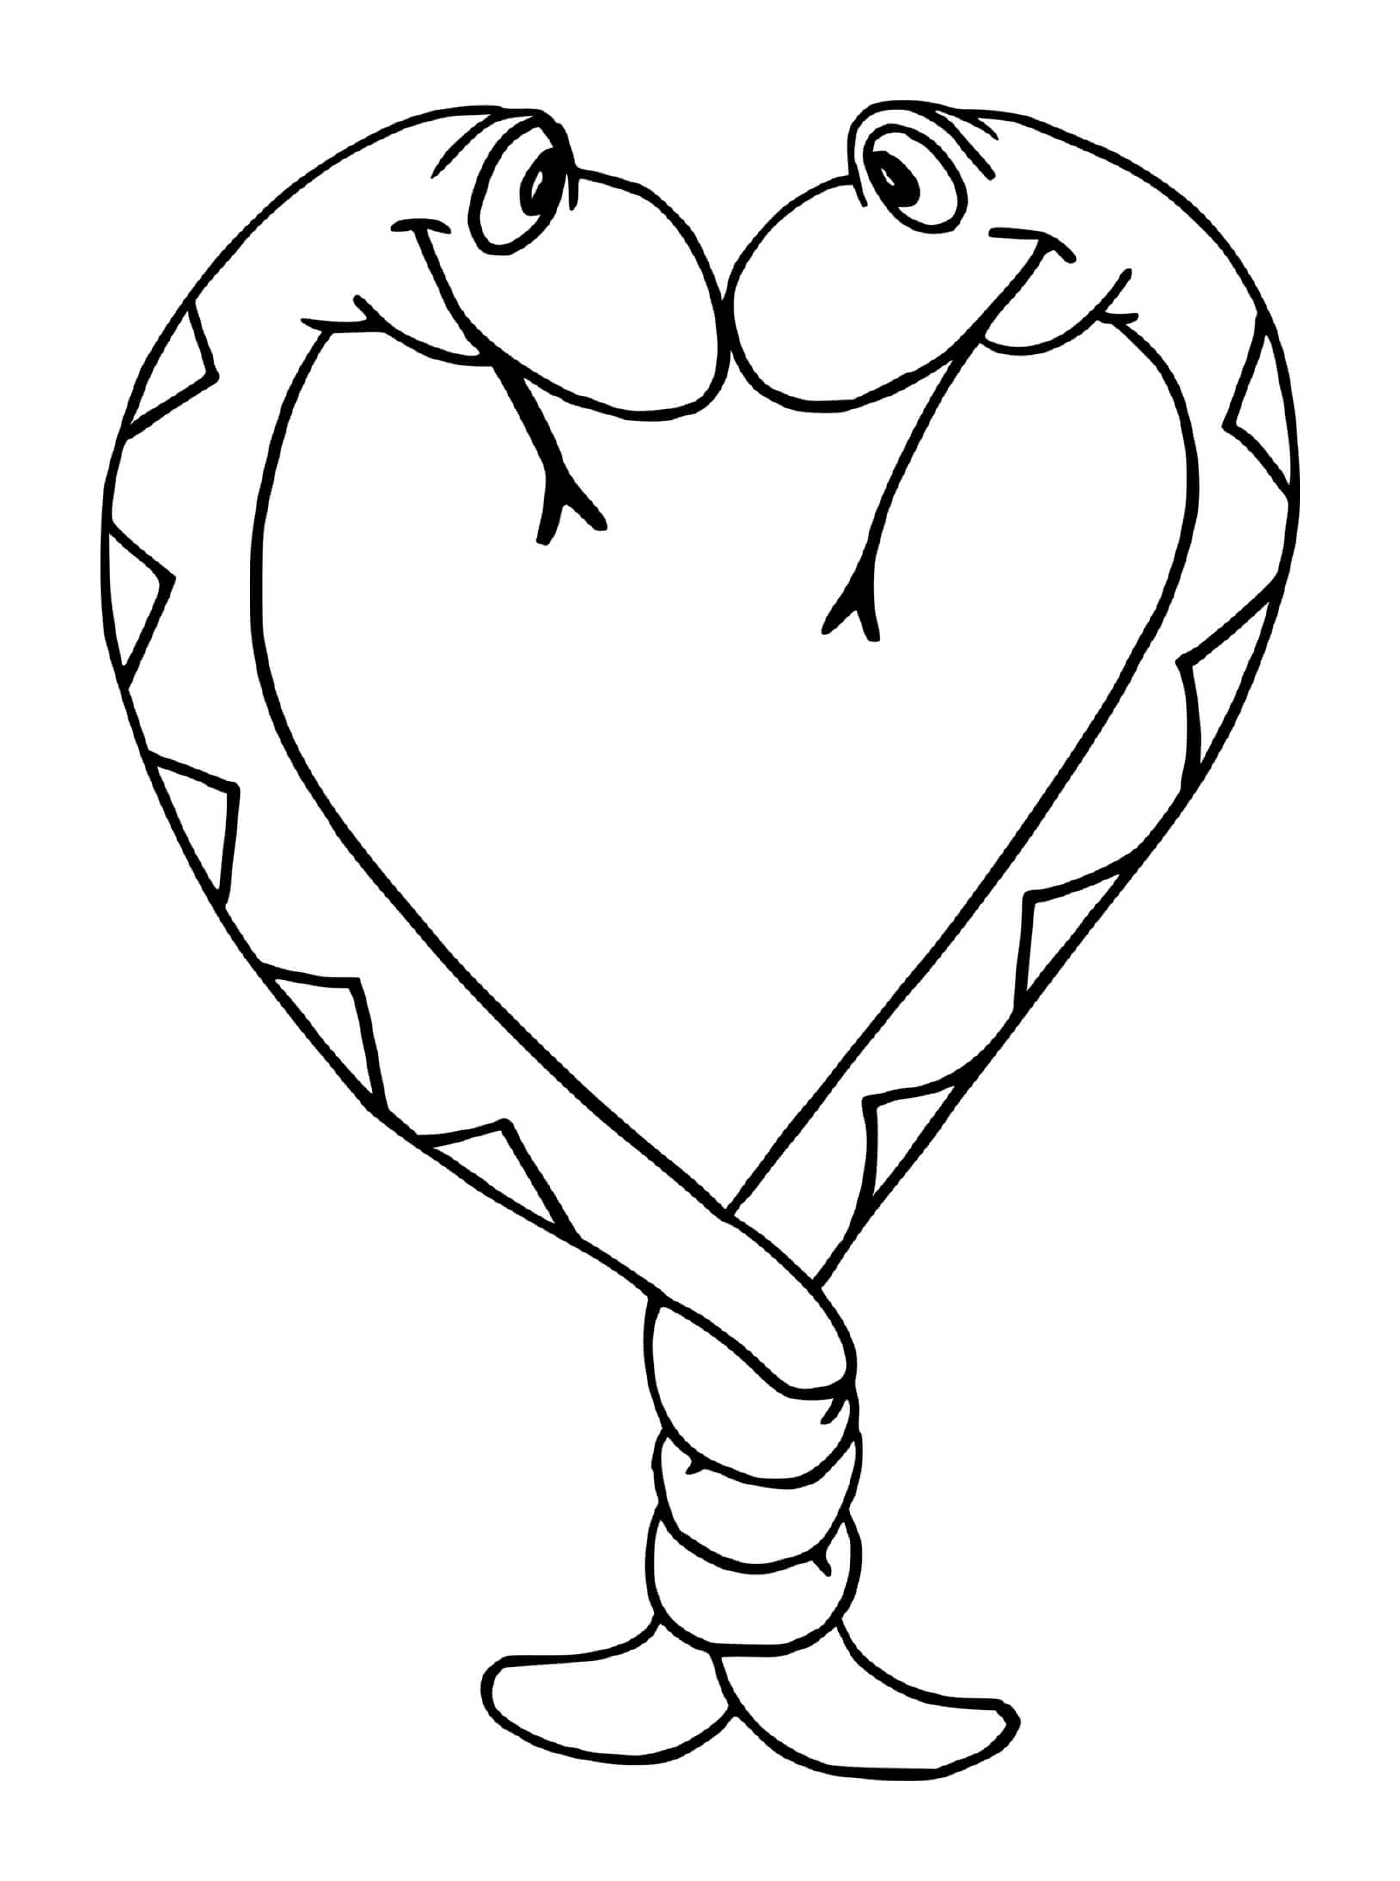  Two snakes that form a heart 